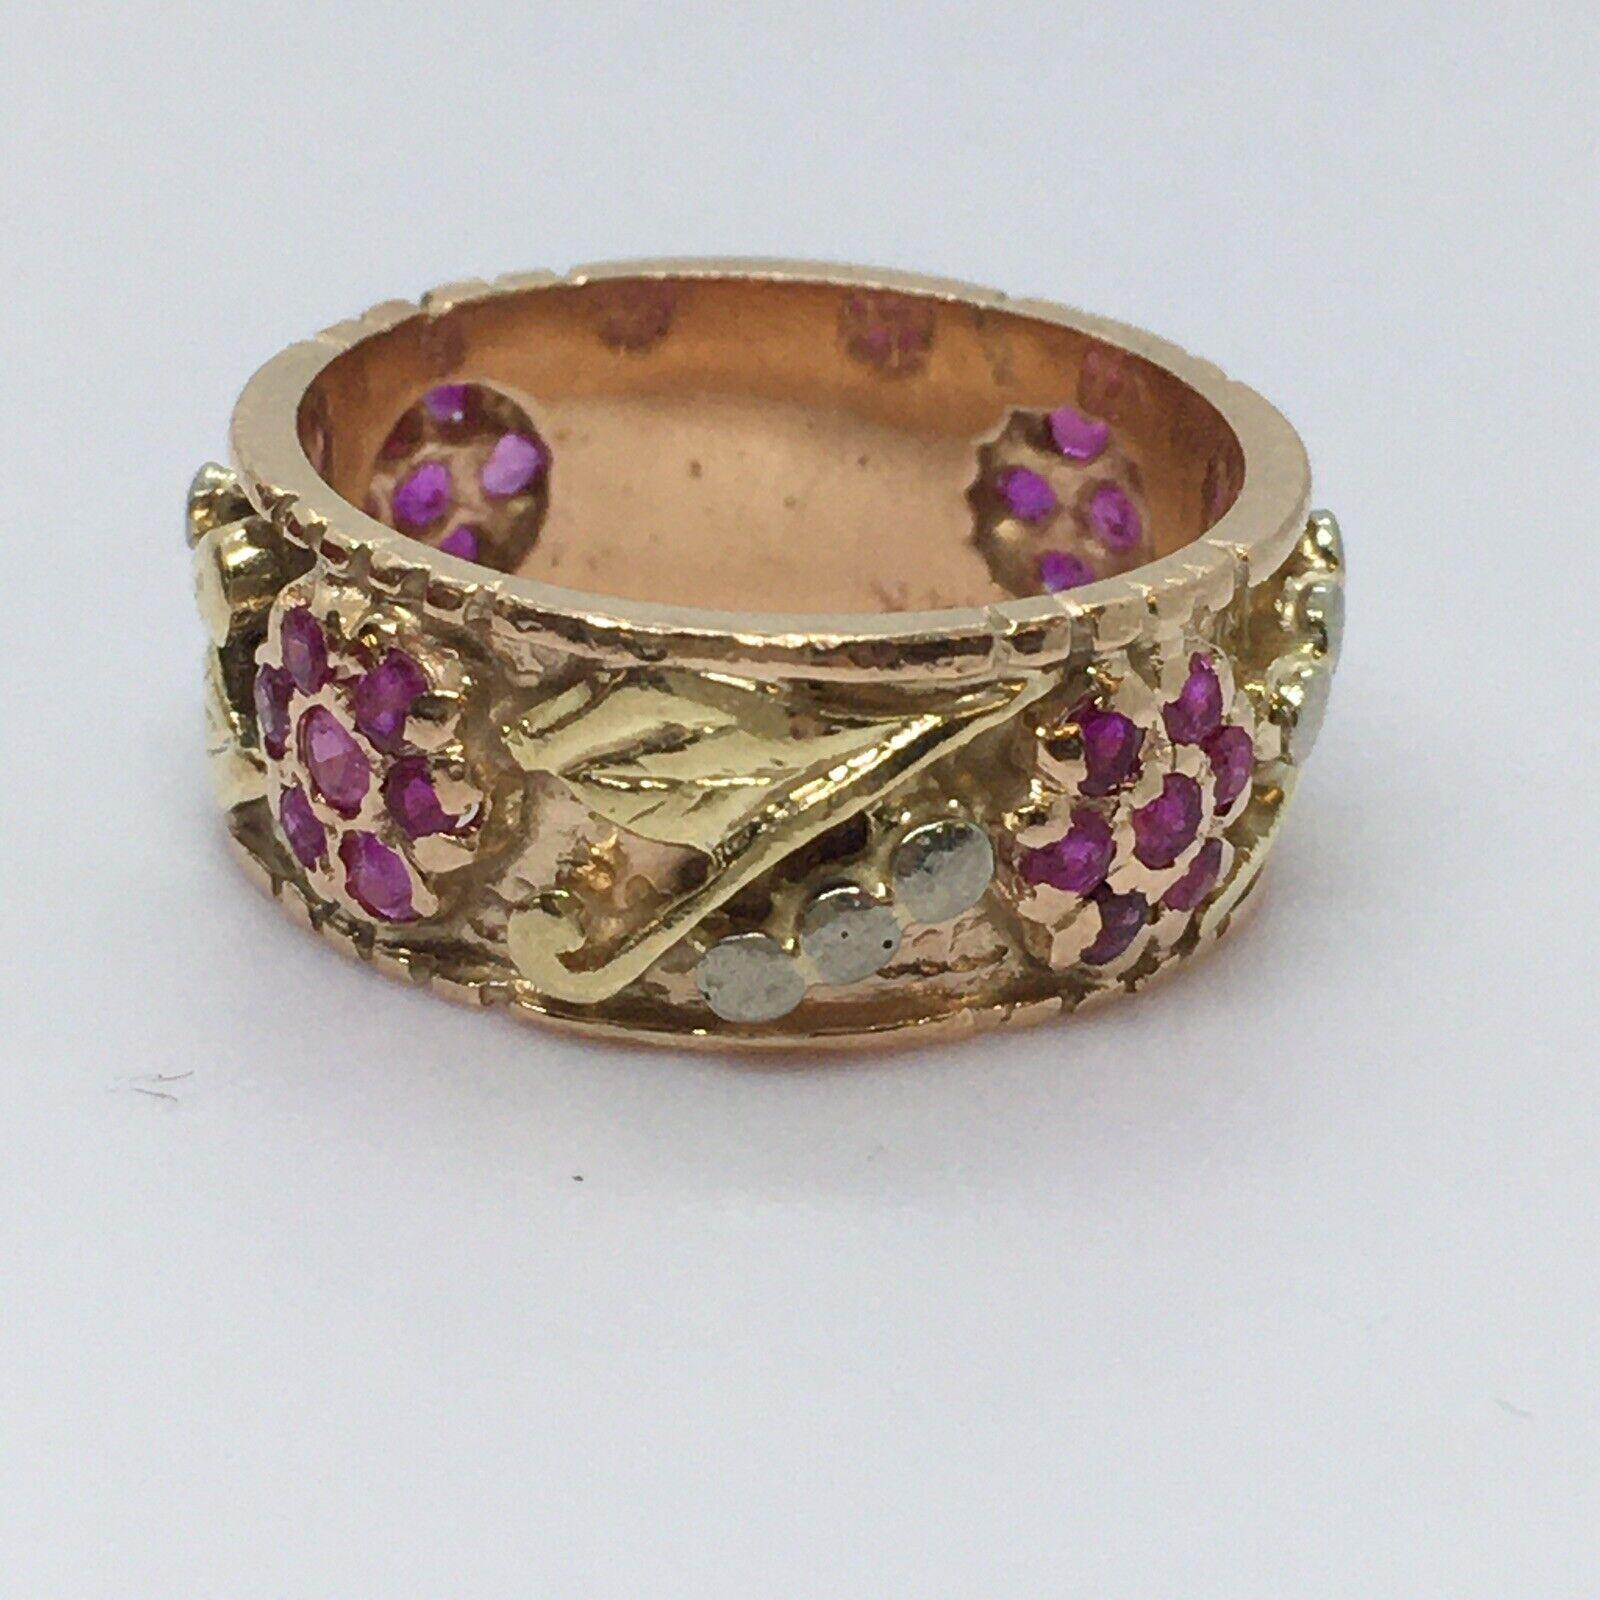 American Antique Art Deco 14k Tricolor Gold Burmese Ruby Band 30s 


Finger size: 6.5
Width: 8mm / .3 inch  
Weight: 5.5 gram 
Country of origin: United States 
Gems: 28 pieces of Old Round Cut natural Burmese Ruby
Condition: pre-owned, stones have